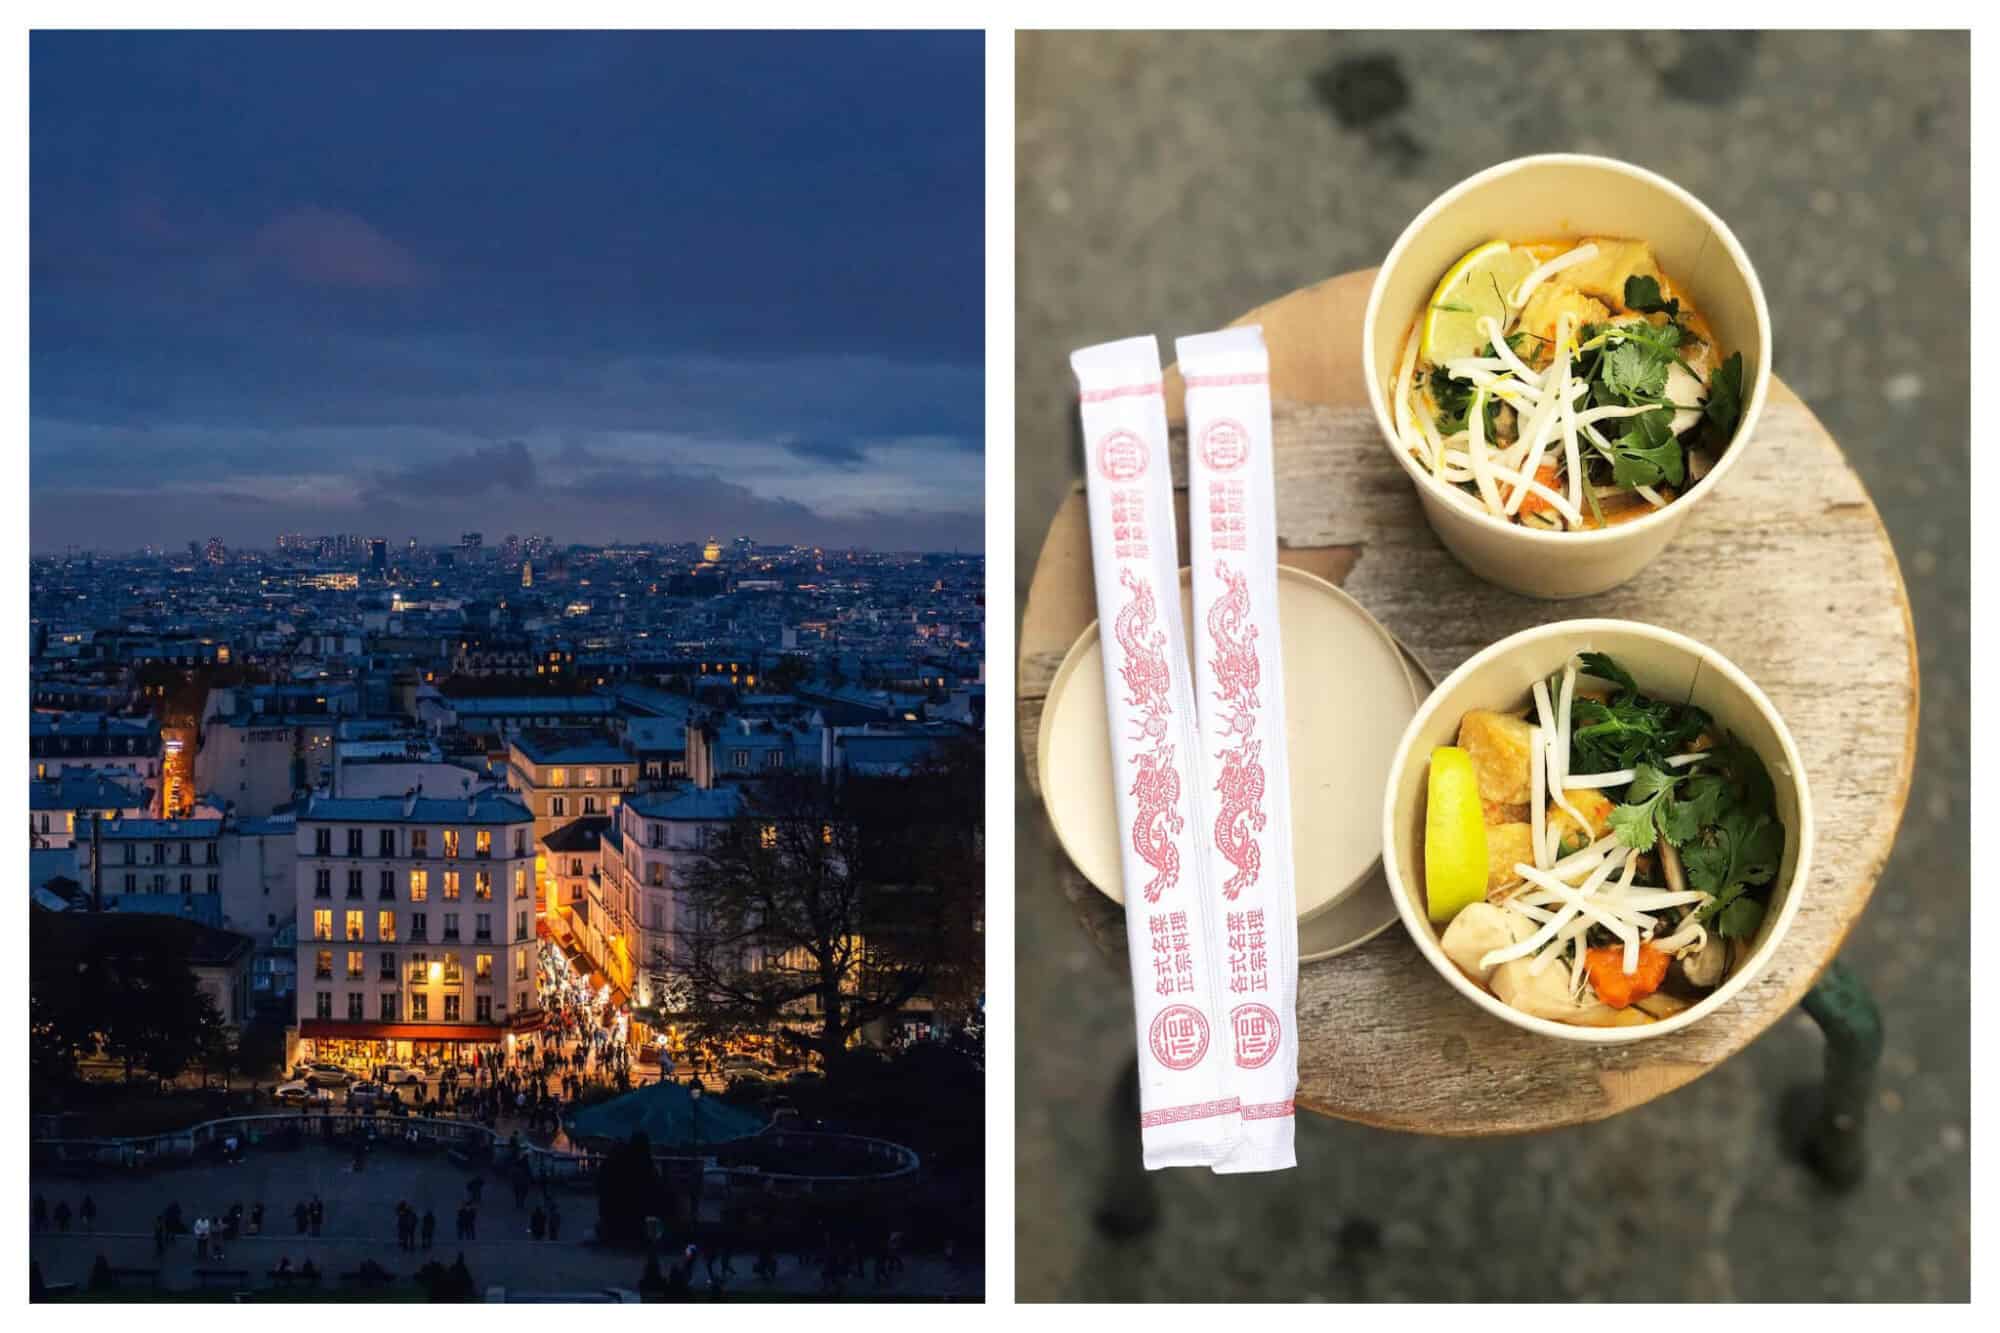 Left: A view of the bottom of Montmartre is visible under the blue and purple tones of dusk, bright orange light illuminates from the buildings and street in the middle of the photo, Right: Two pairs of chopsticks and bowls of Southeast-Asian food from The Hood in Paris sit on a wooden stool.